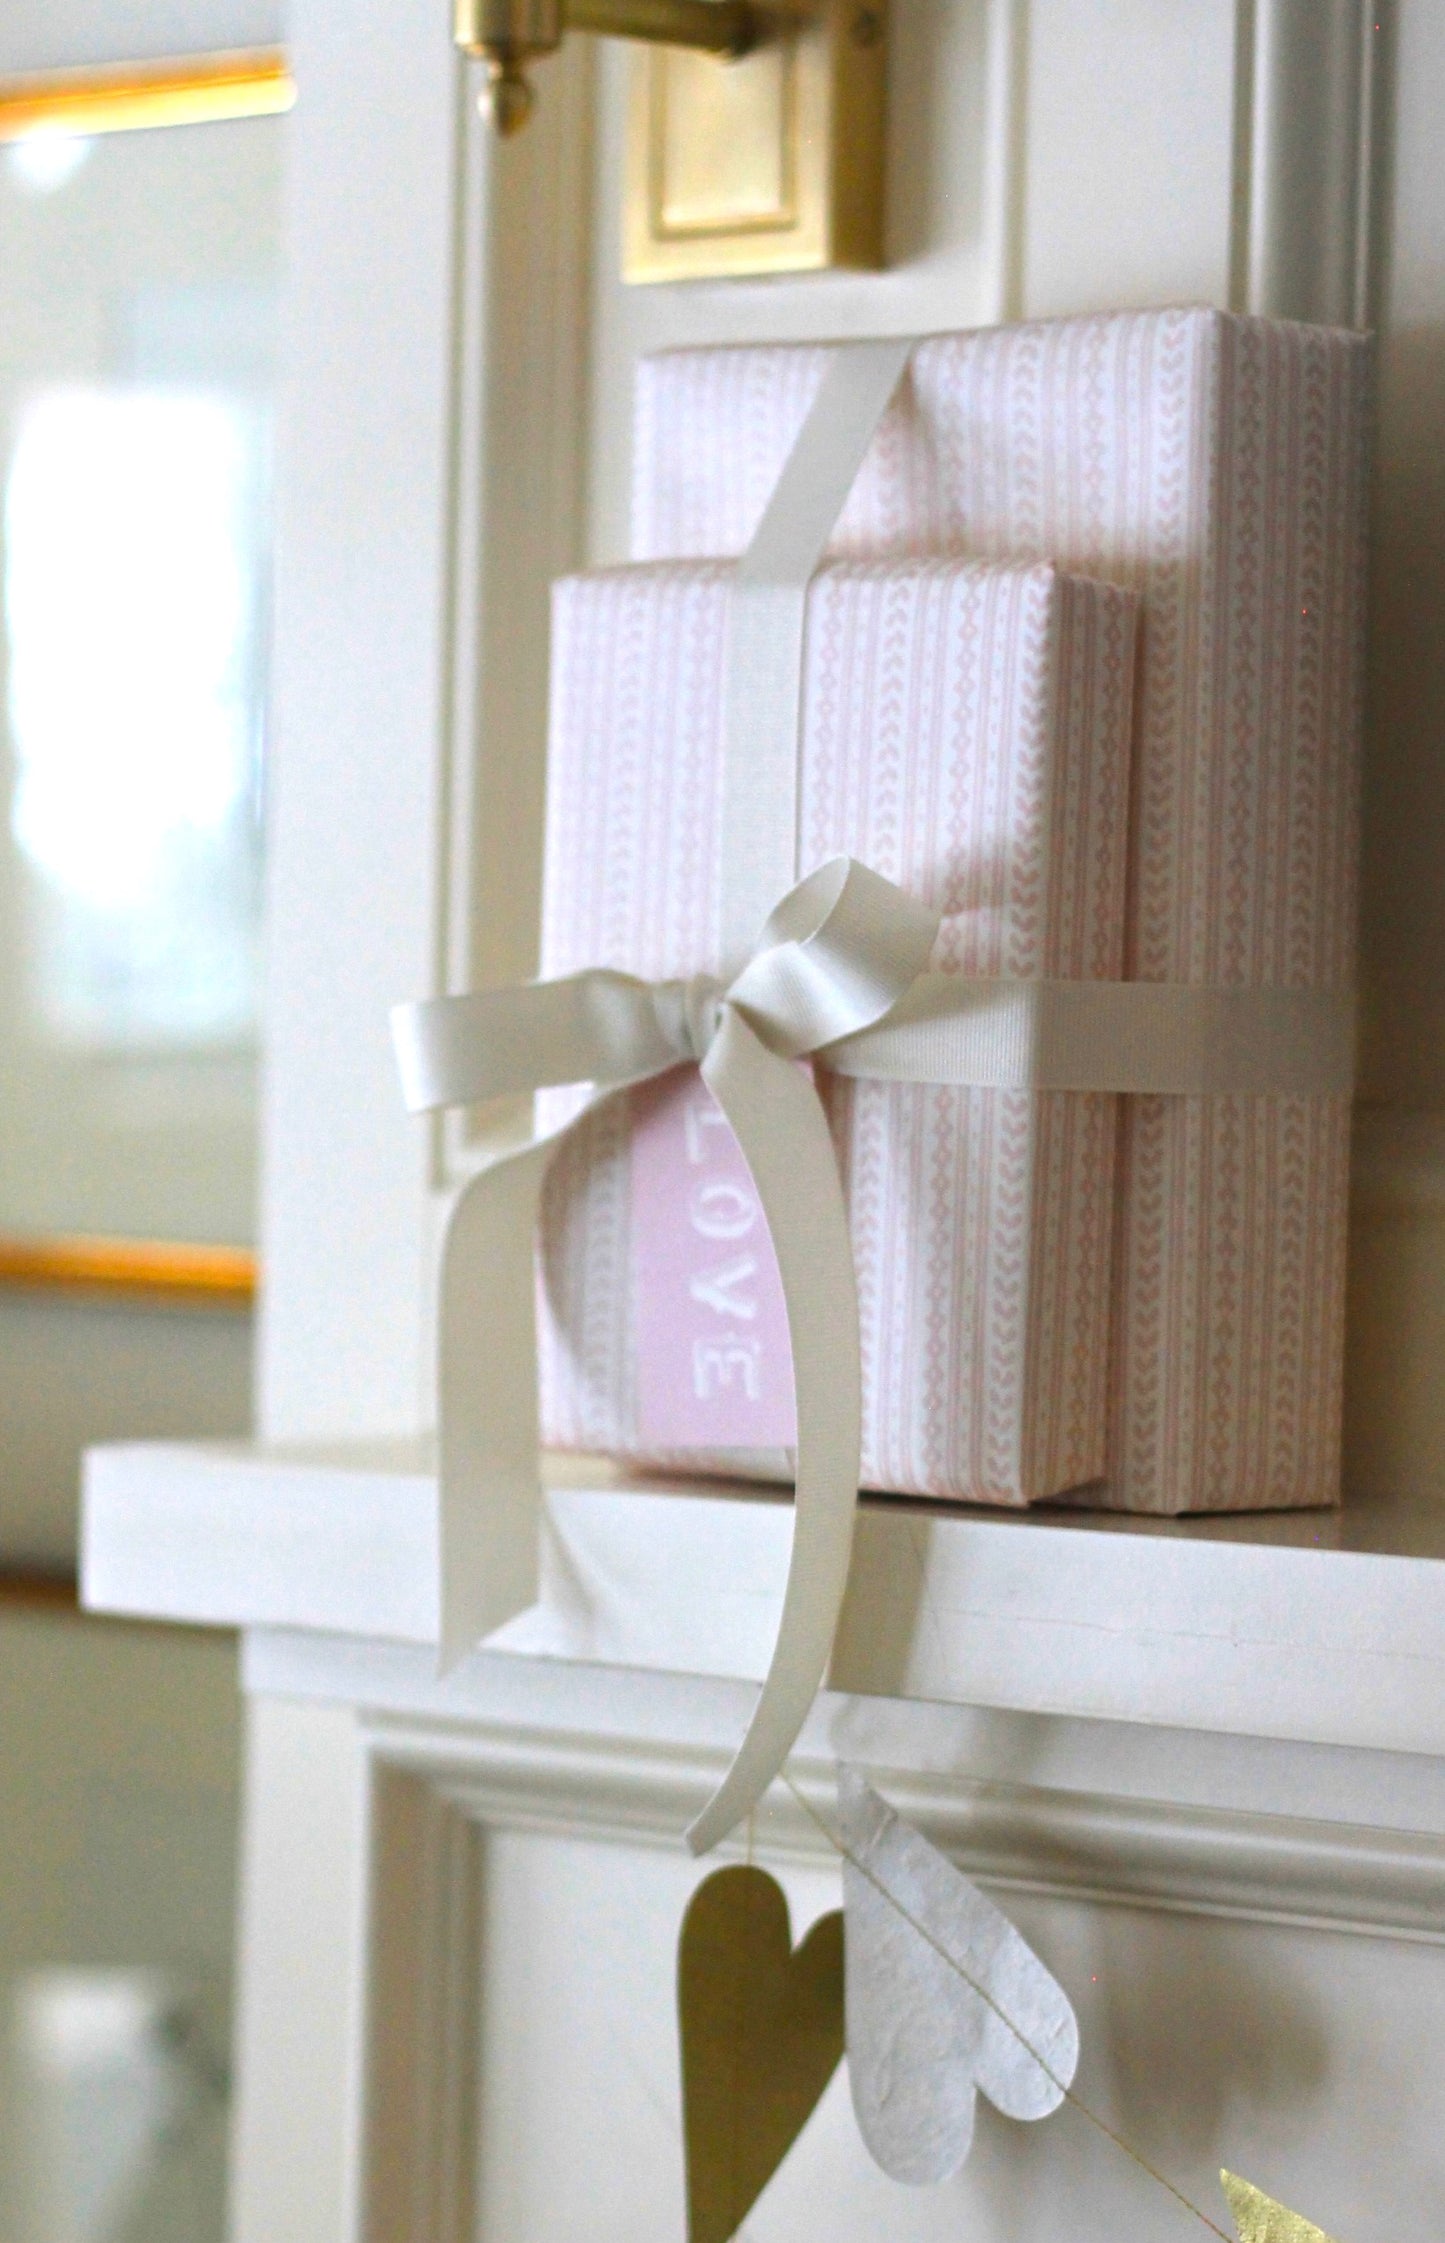 Cottage Stripe Wrapping Paper in Rose